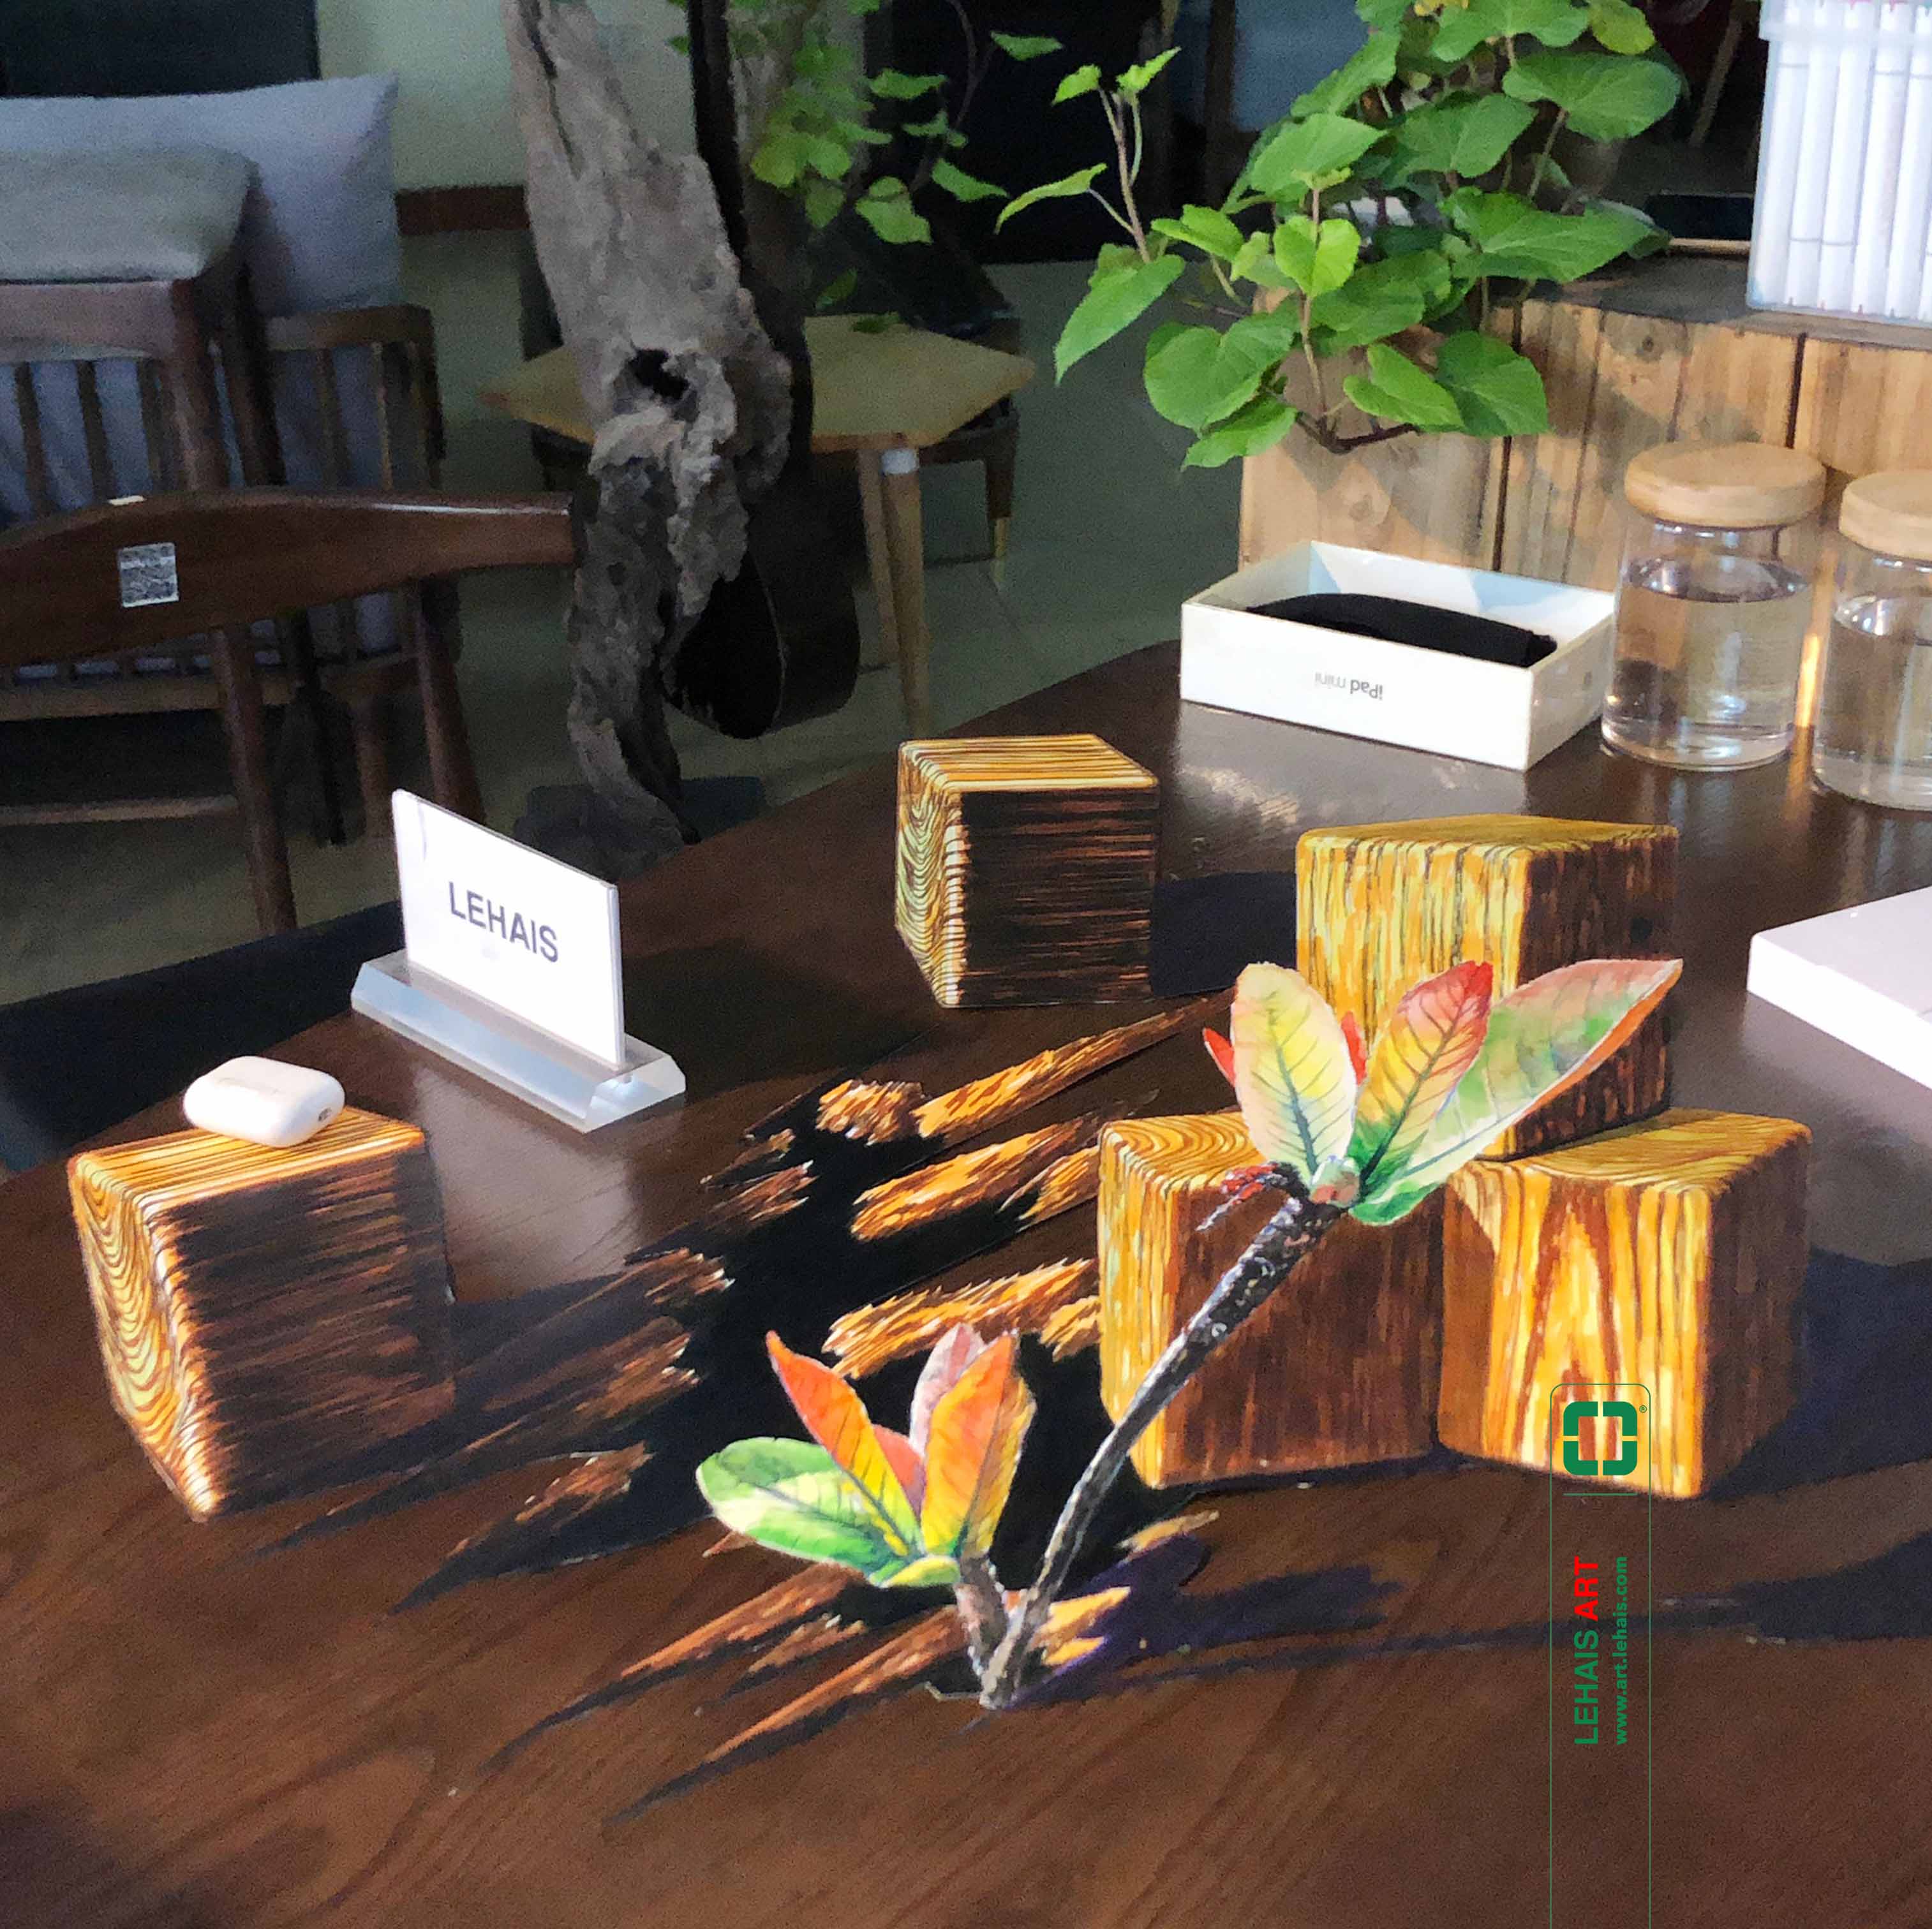 Draw an effective 3D painting with wooden cubes and tree buds growing on the table - TMN68LHAR